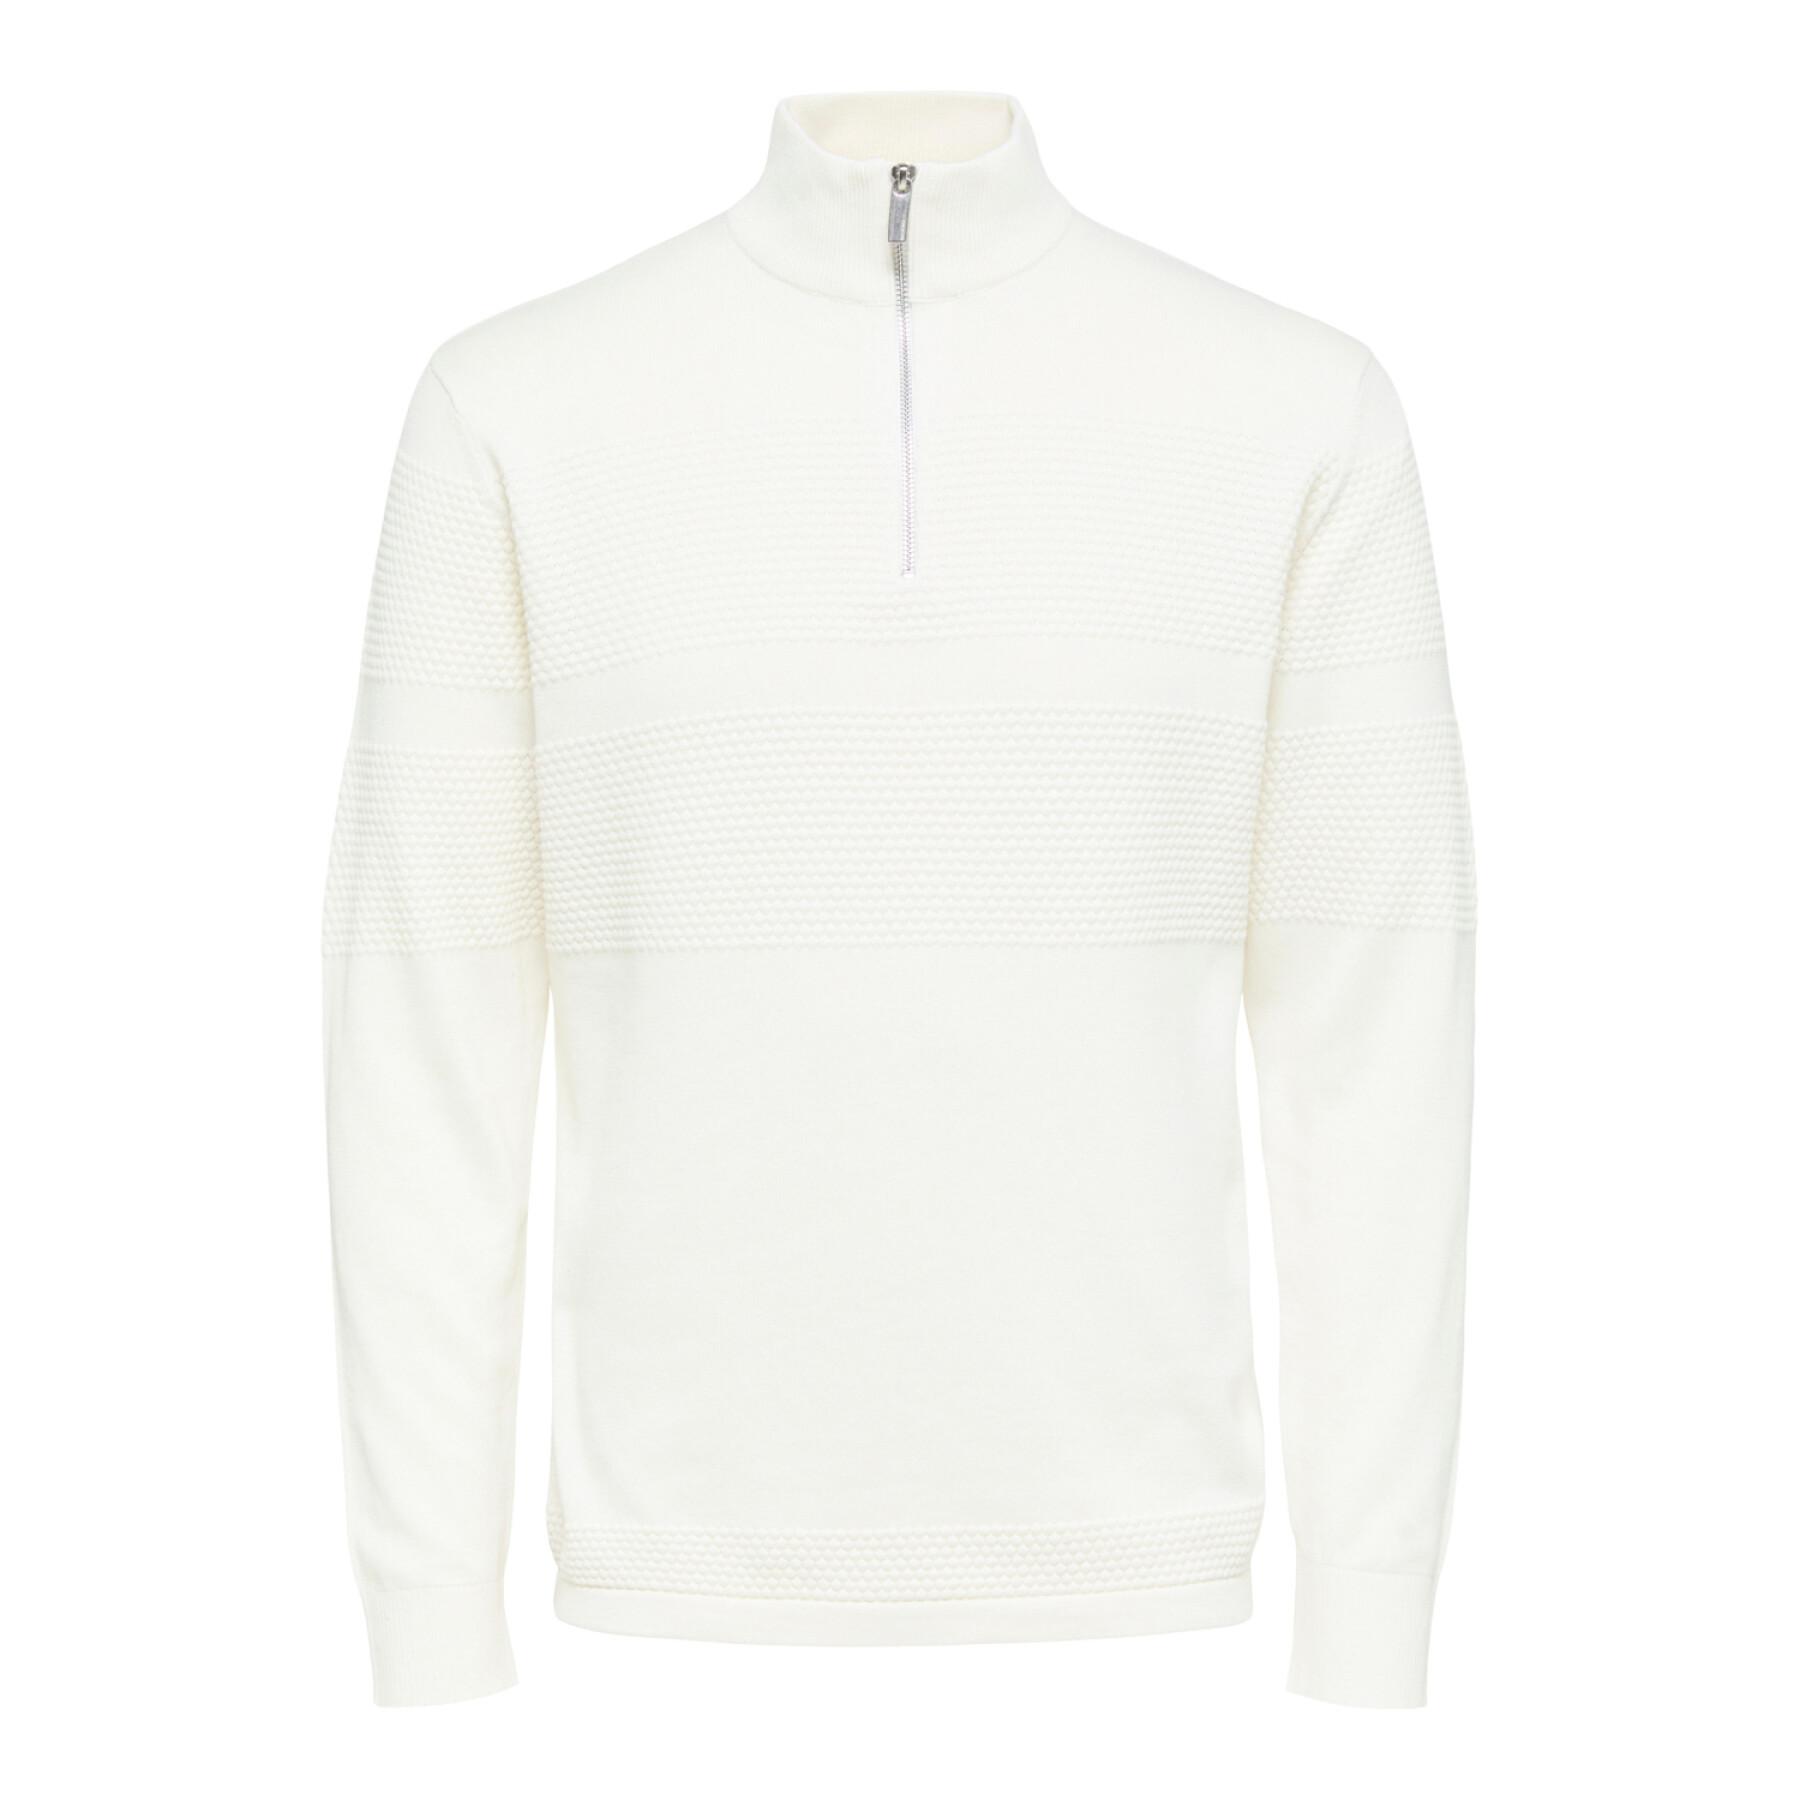 1/2 zip knit jumper Selected Maine